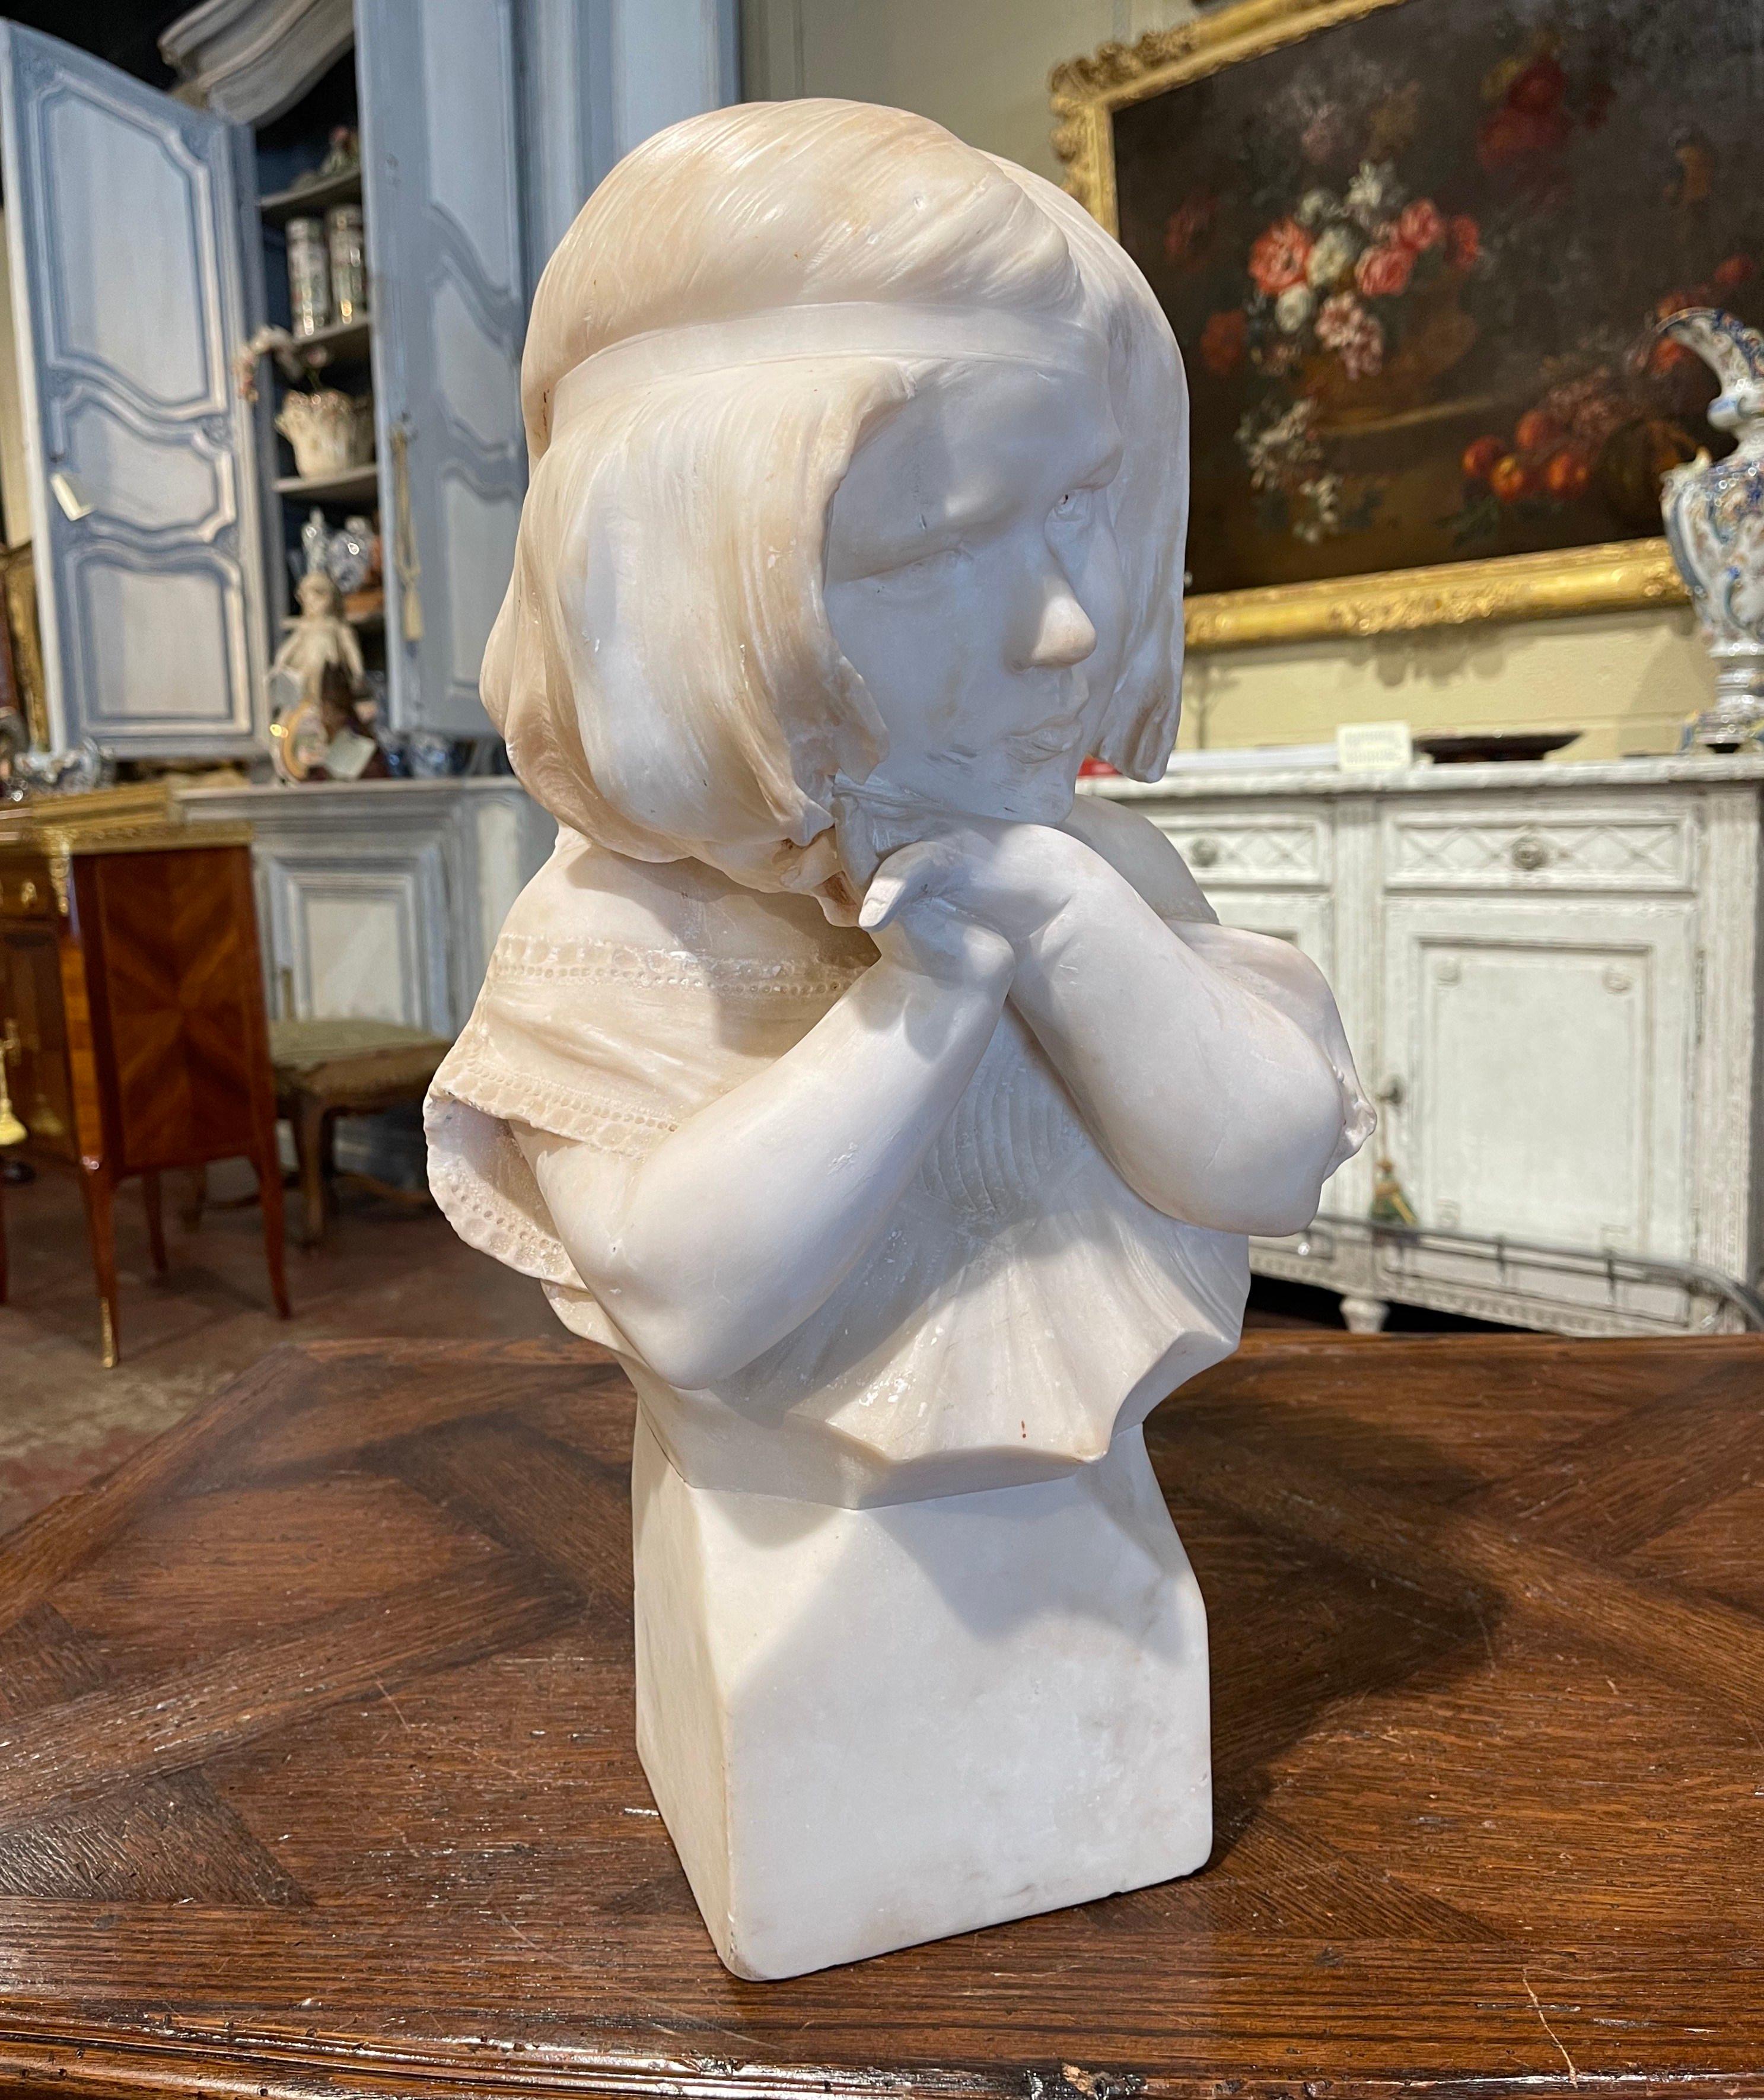 Crafted in France circa 1890, this antique marble bust is a true representation of French elegance. The figural sculpture stands on an attached white and grey square base, and features a beautiful, young girl in a lace dress with delicately posed